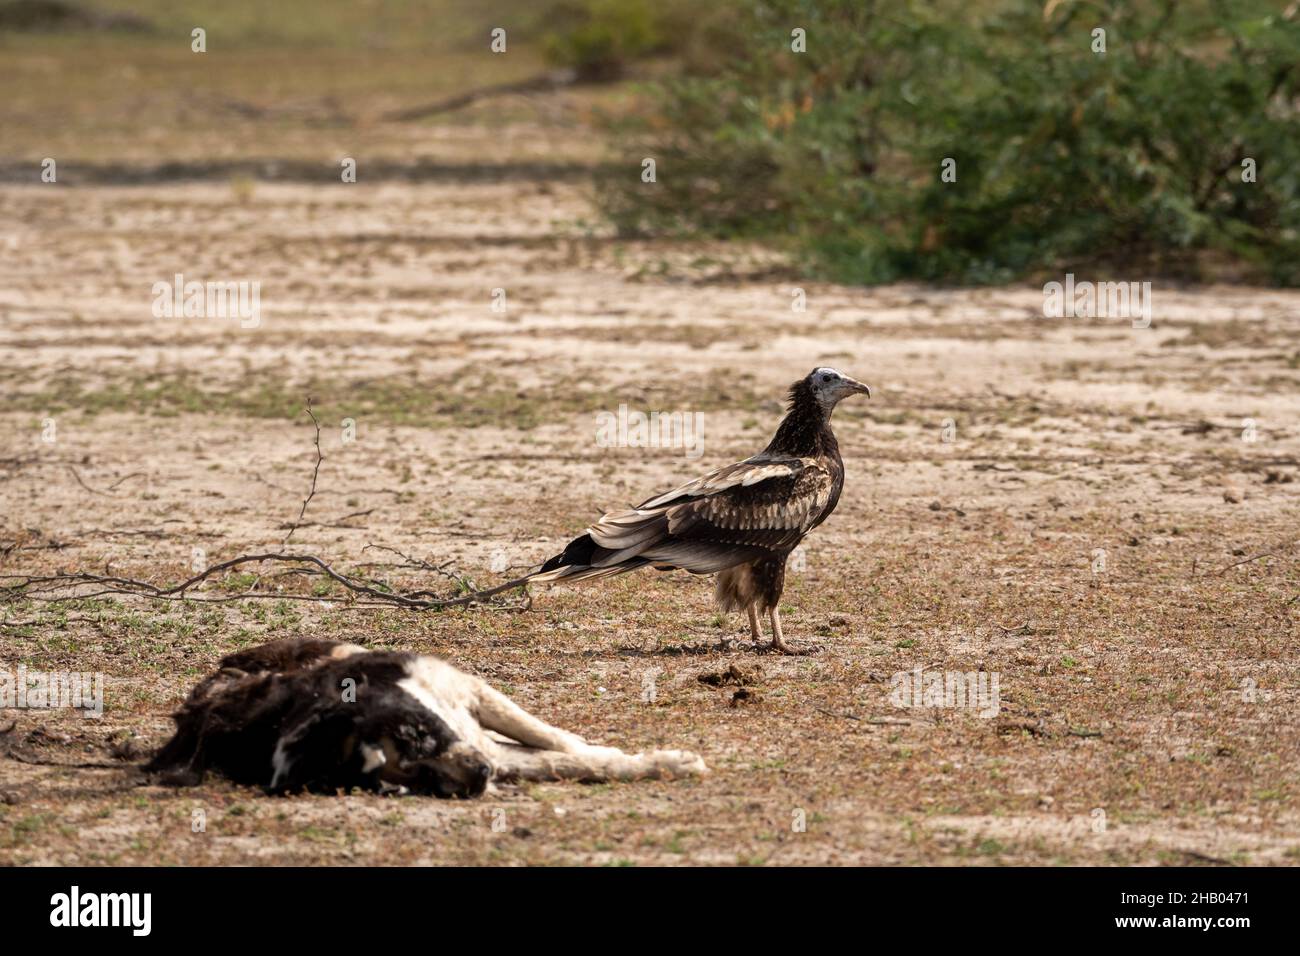 Egyptian vulture or Neophron percnopterus scavenging over dead carcass of feral dog at jorbeer conservation reserve or dumping yard at bikaner india Stock Photo